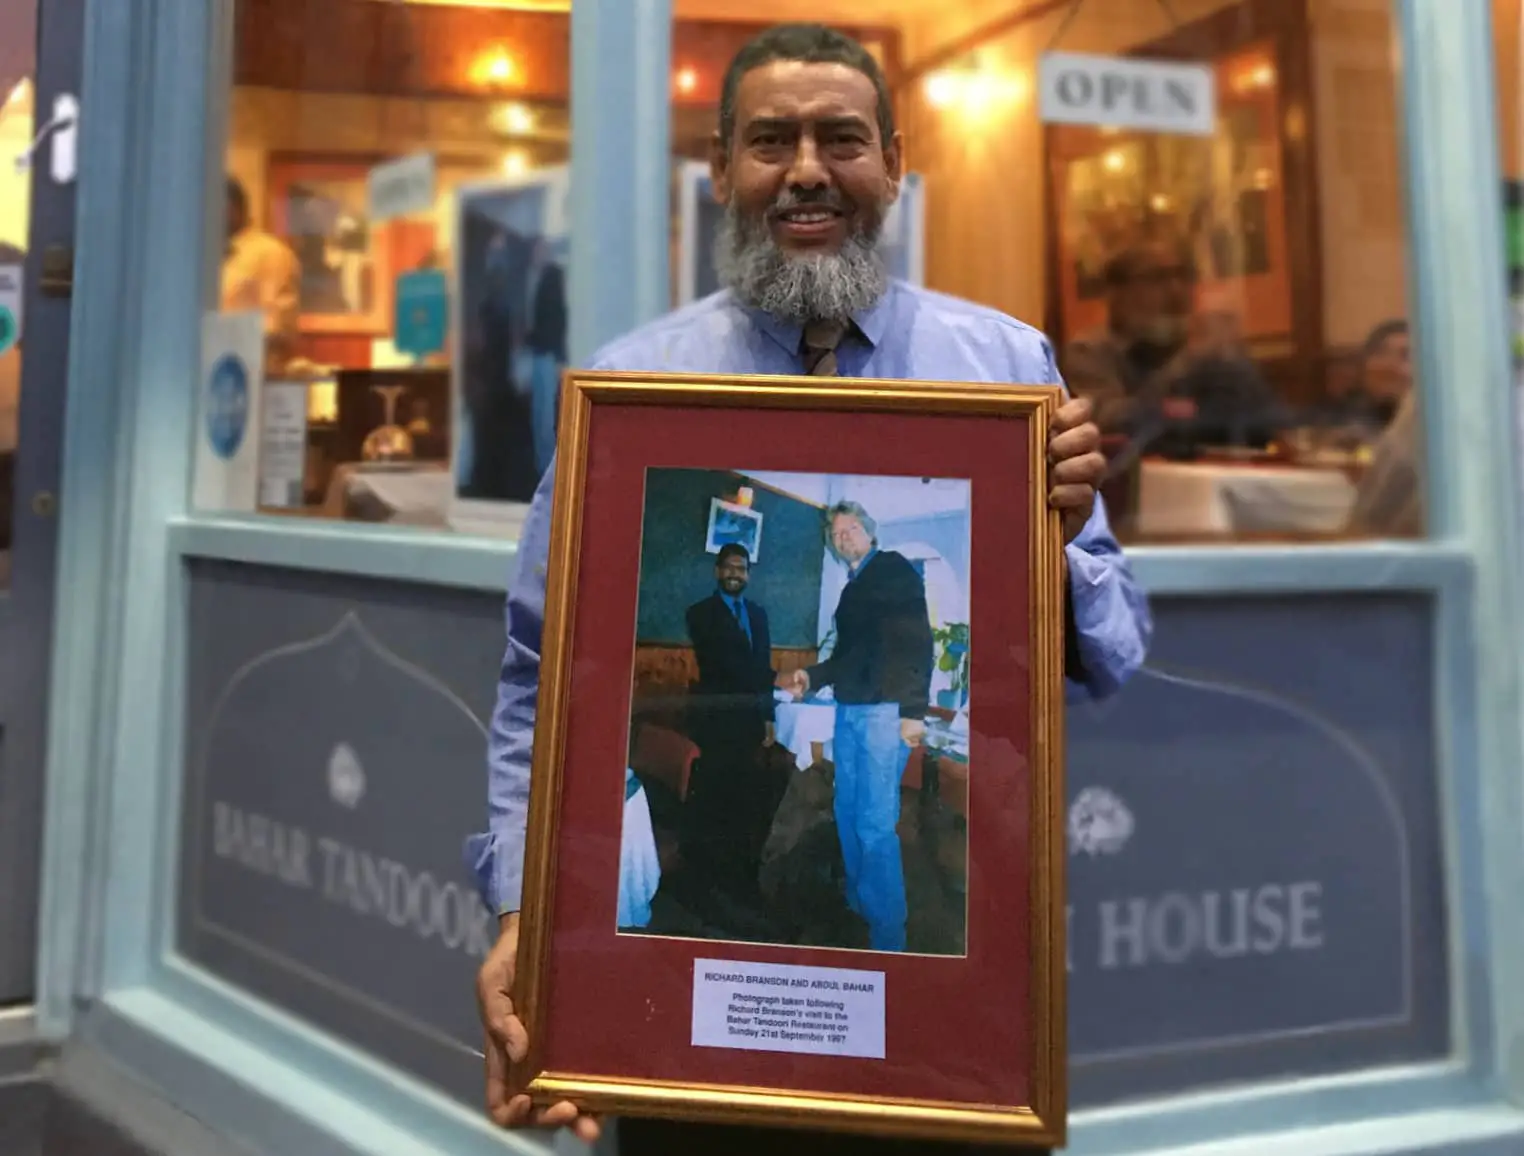 Abdul Bahar outside his restaurant holding the photo of him and Richard Branson from 1997